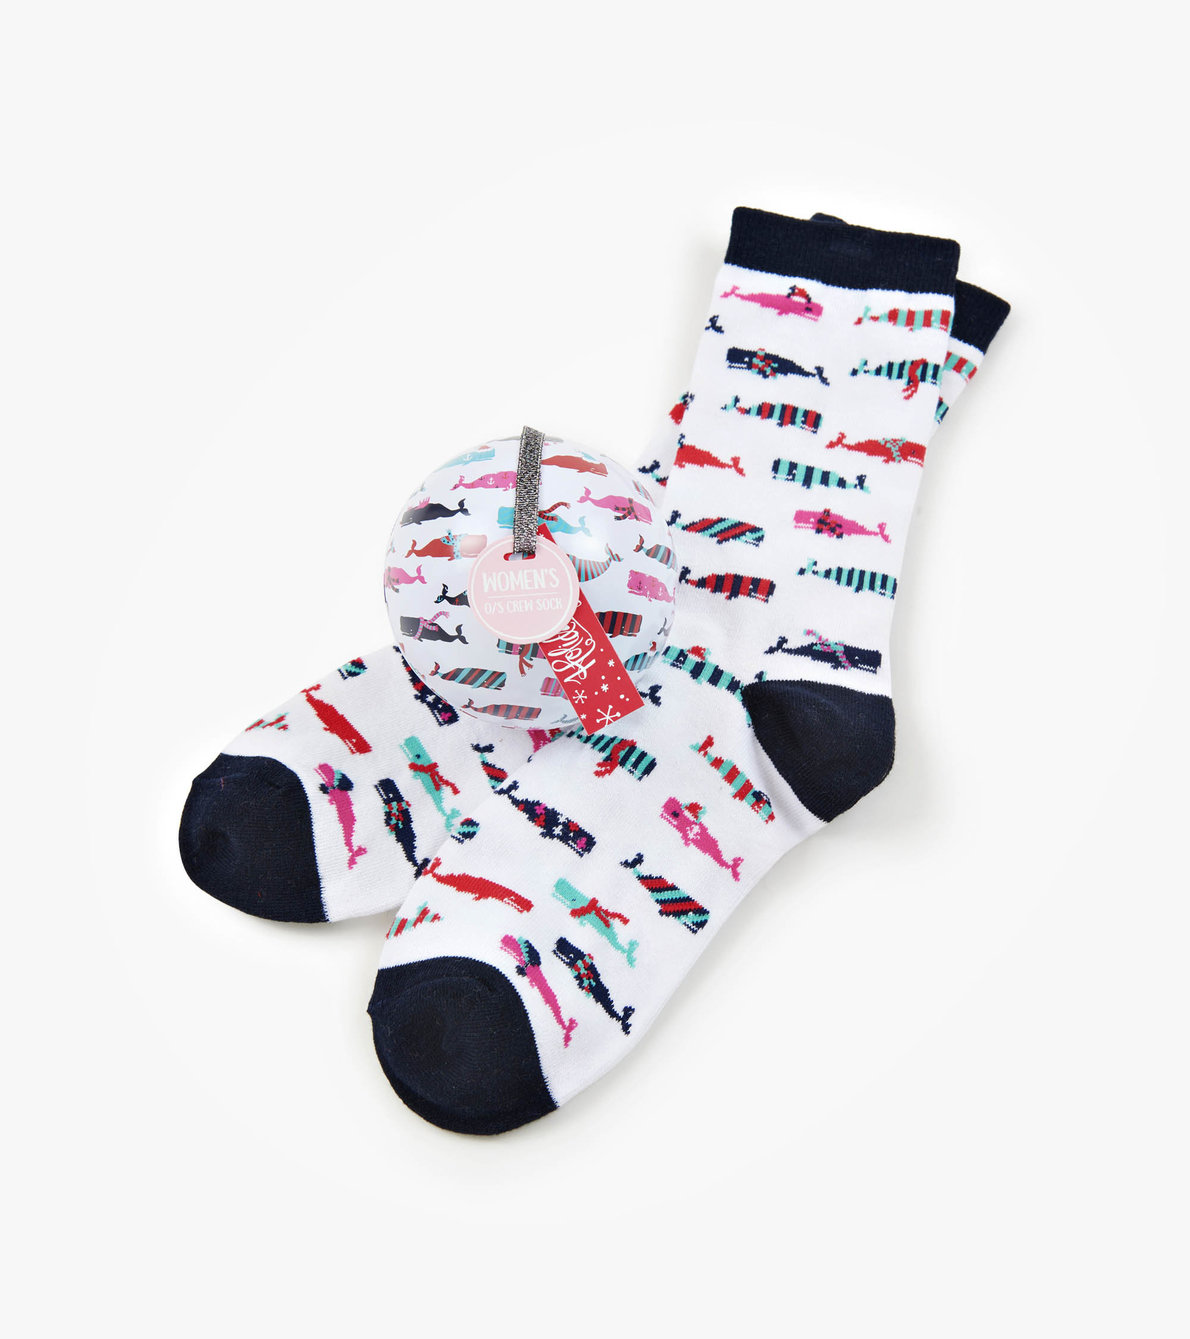 View larger image of Holiday Whales Women's Socks in Balls